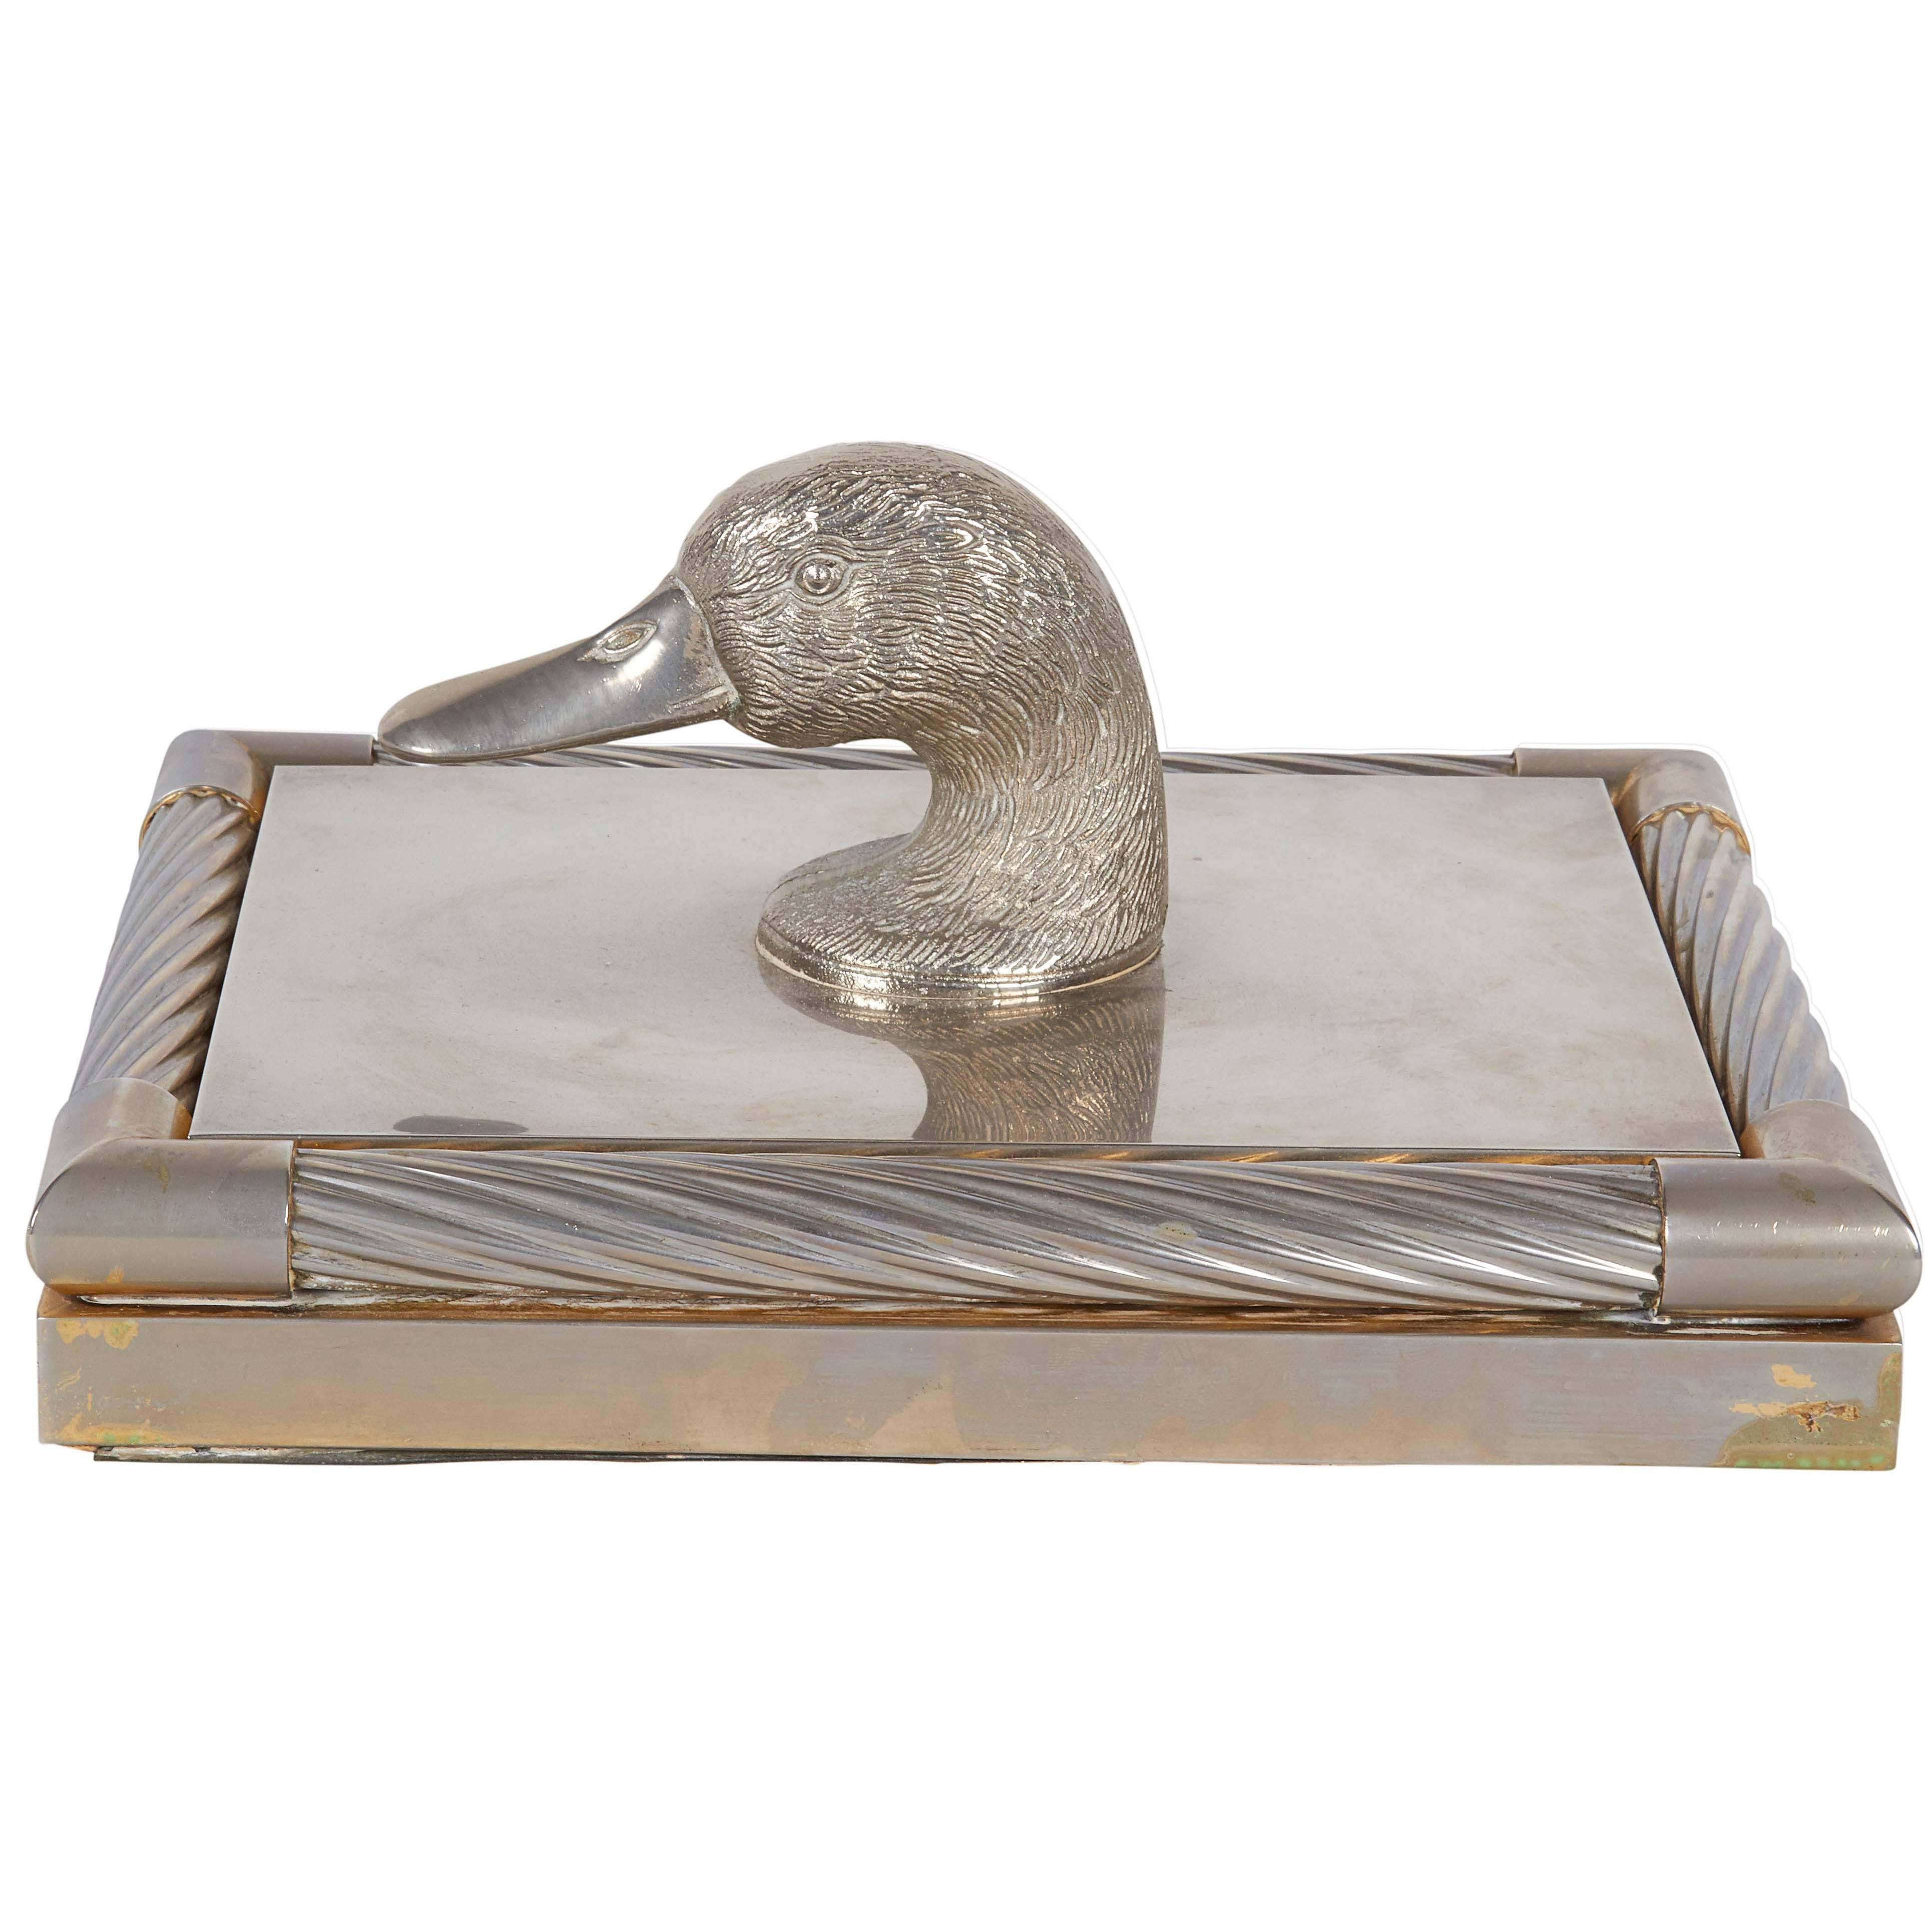 Decorative Lidded Box with Duck Finial